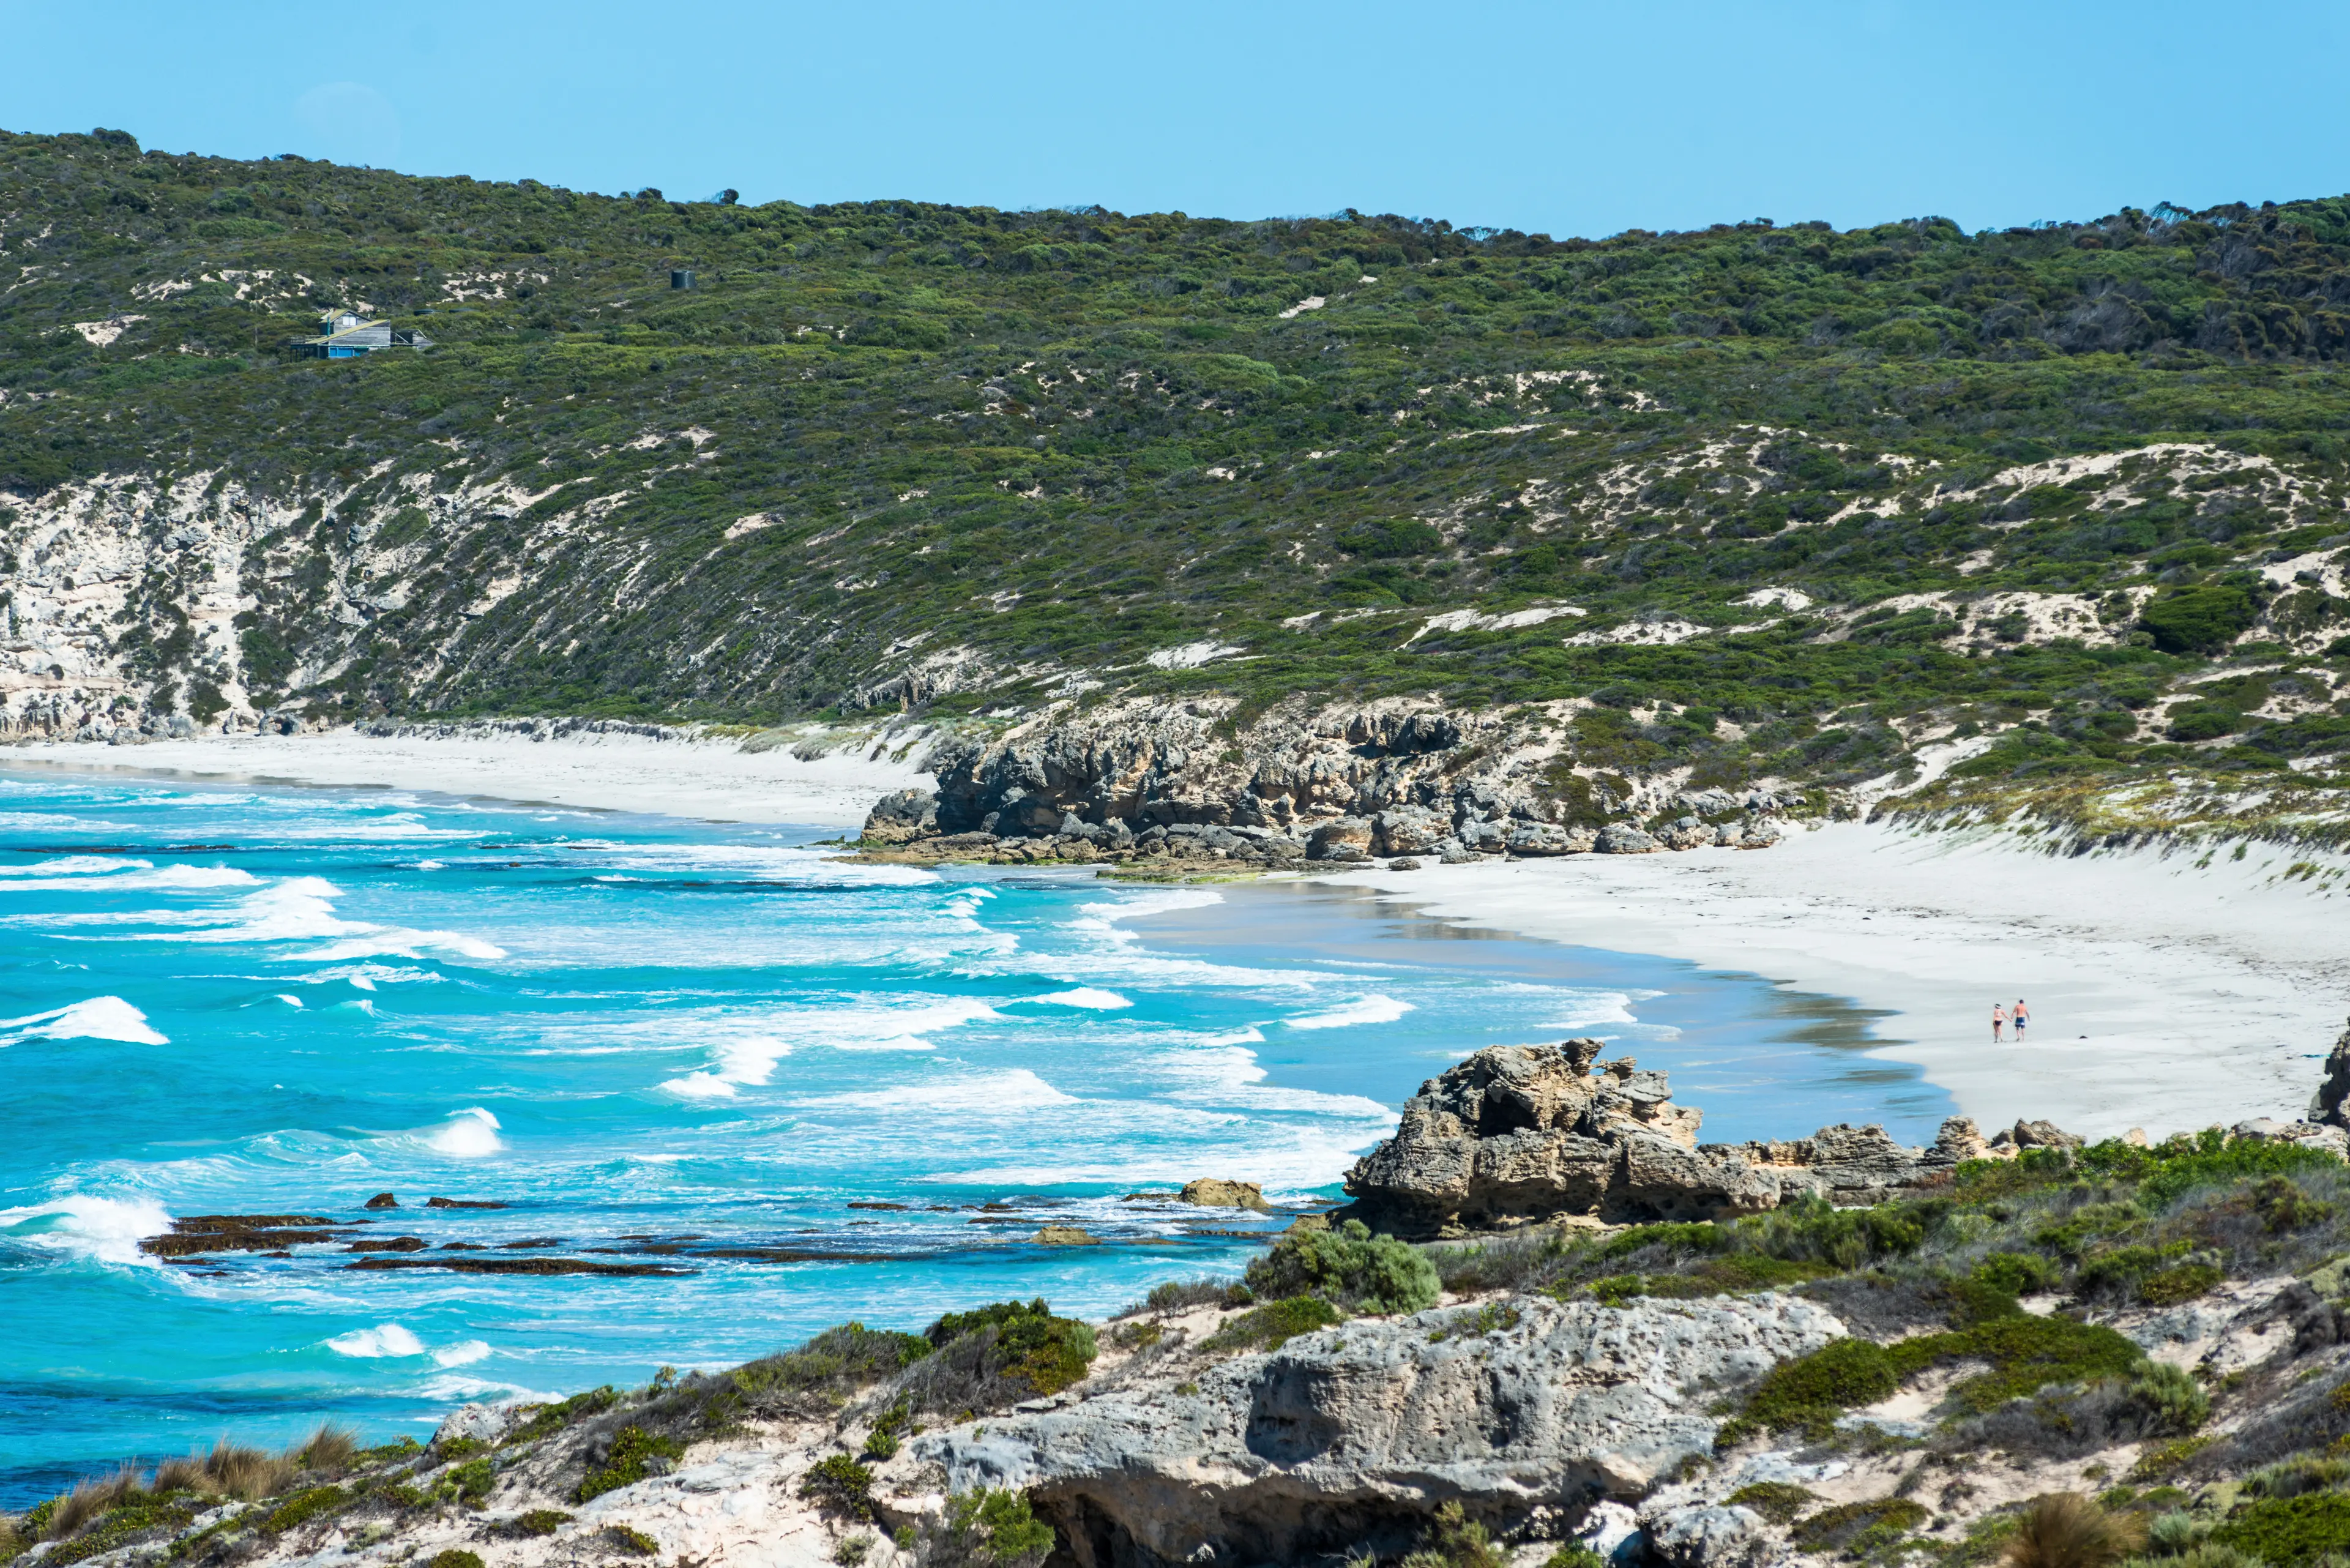 3-Day Local Adventure and Sightseeing Guide to Kangaroo Island